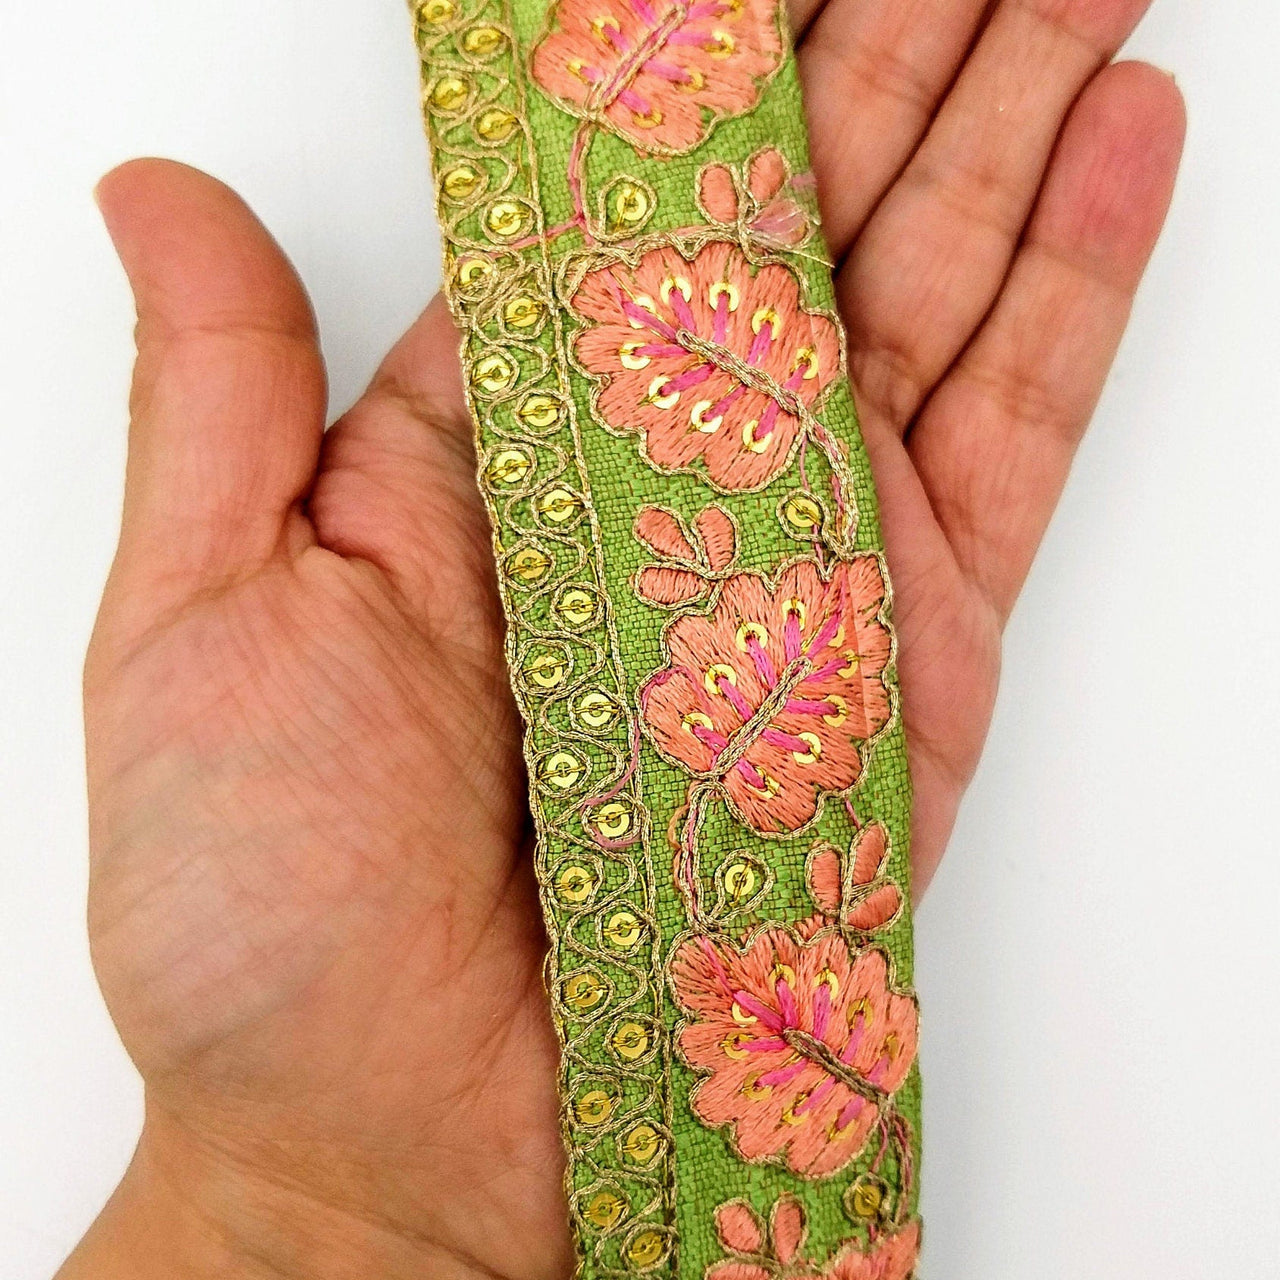 Green Trim with Floral Embroidery Peach Embroidered Leaves Trim, Decorative Trim, Indian Border